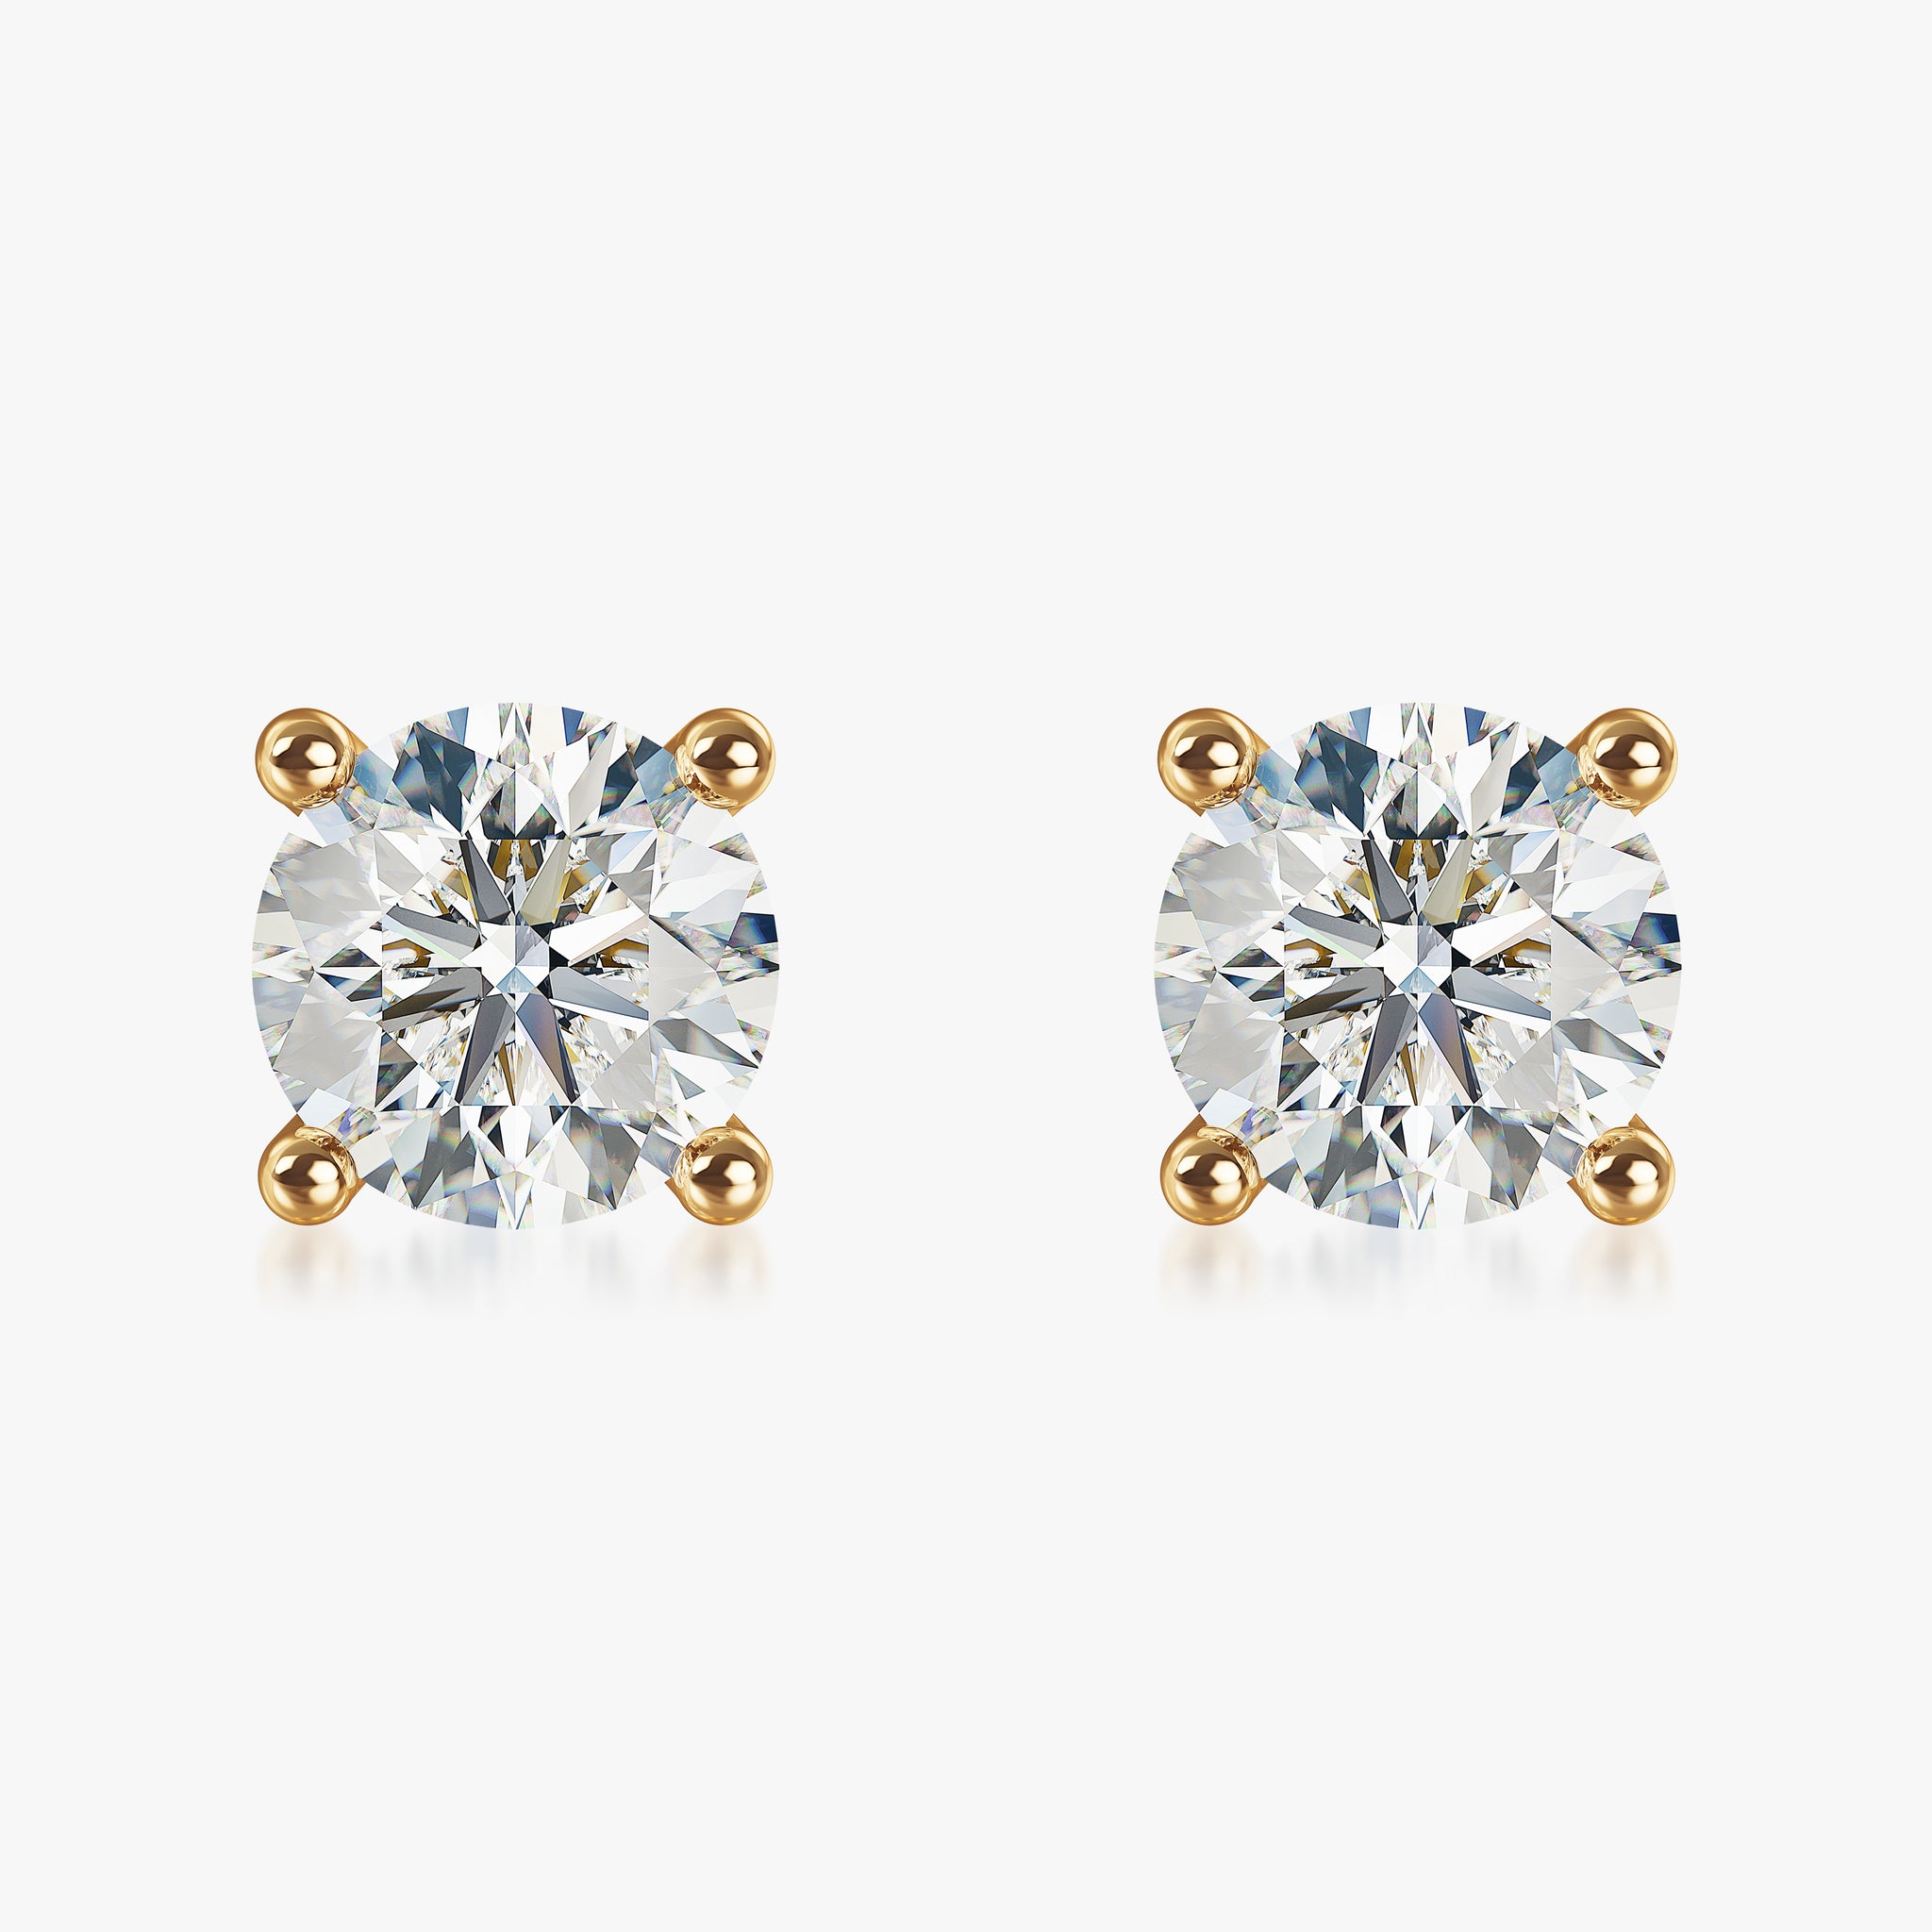 J'EVAR 18KT Yellow Gold ALTR Lab Grown Diamond Stud Earrings with Guardian Backs Front View